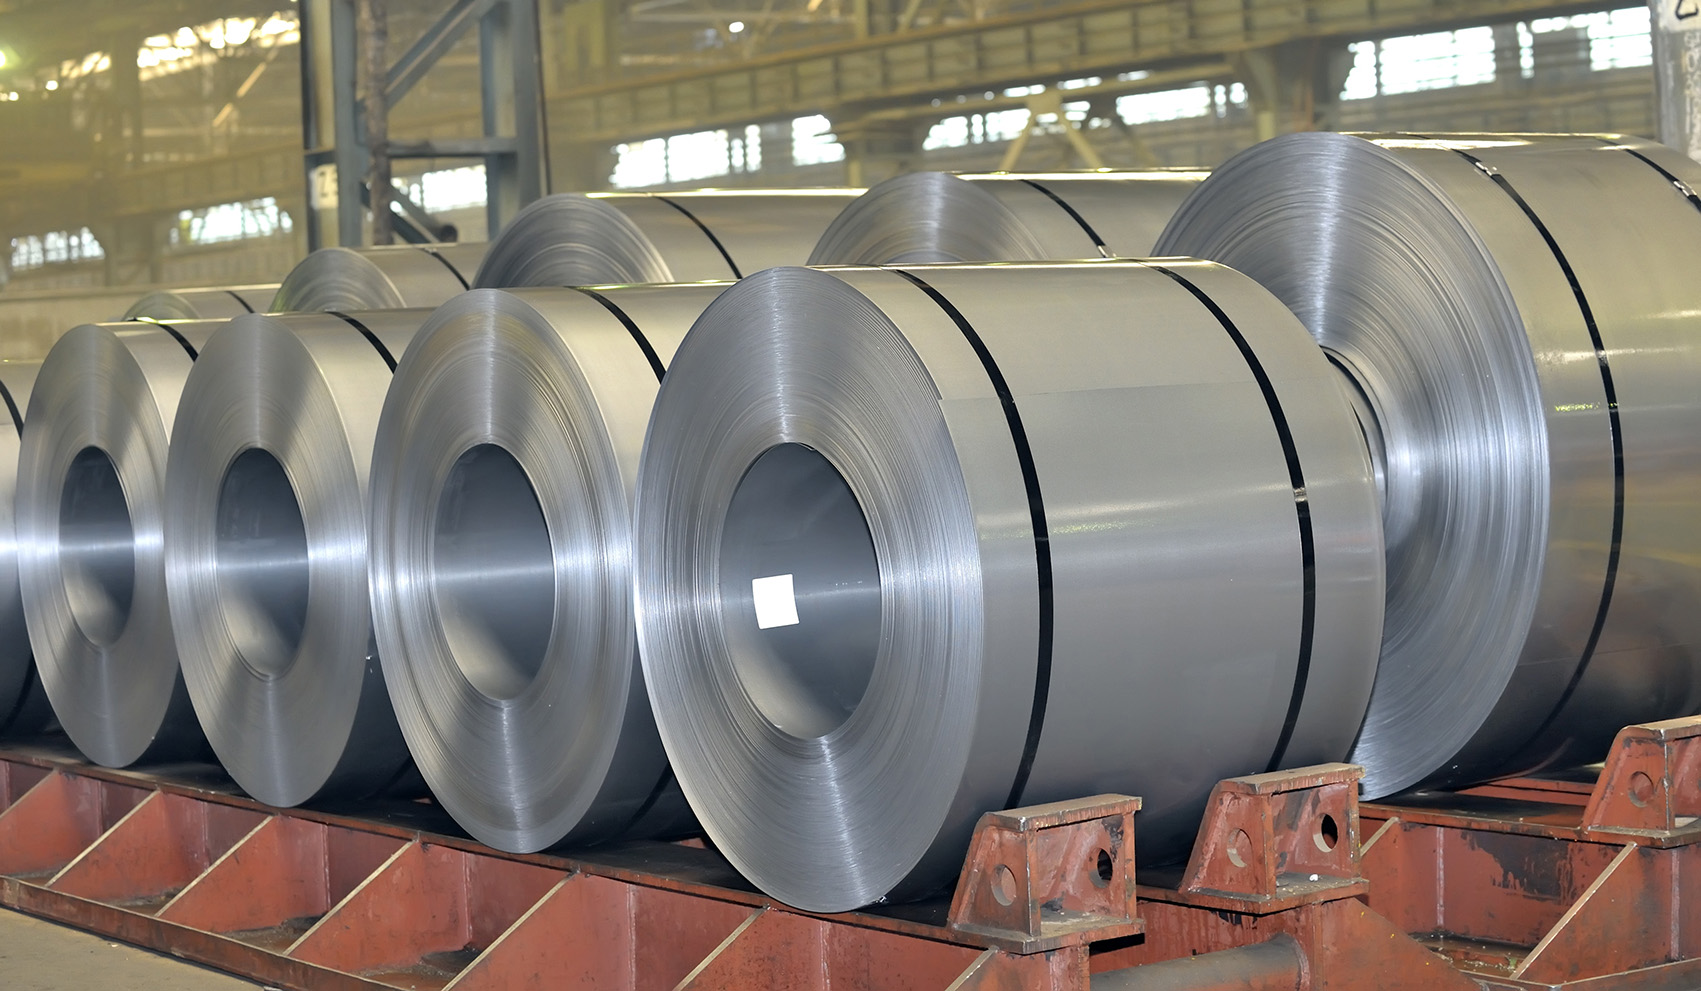 Imported Flat Steel Buying Thin Over Lower Local Prices